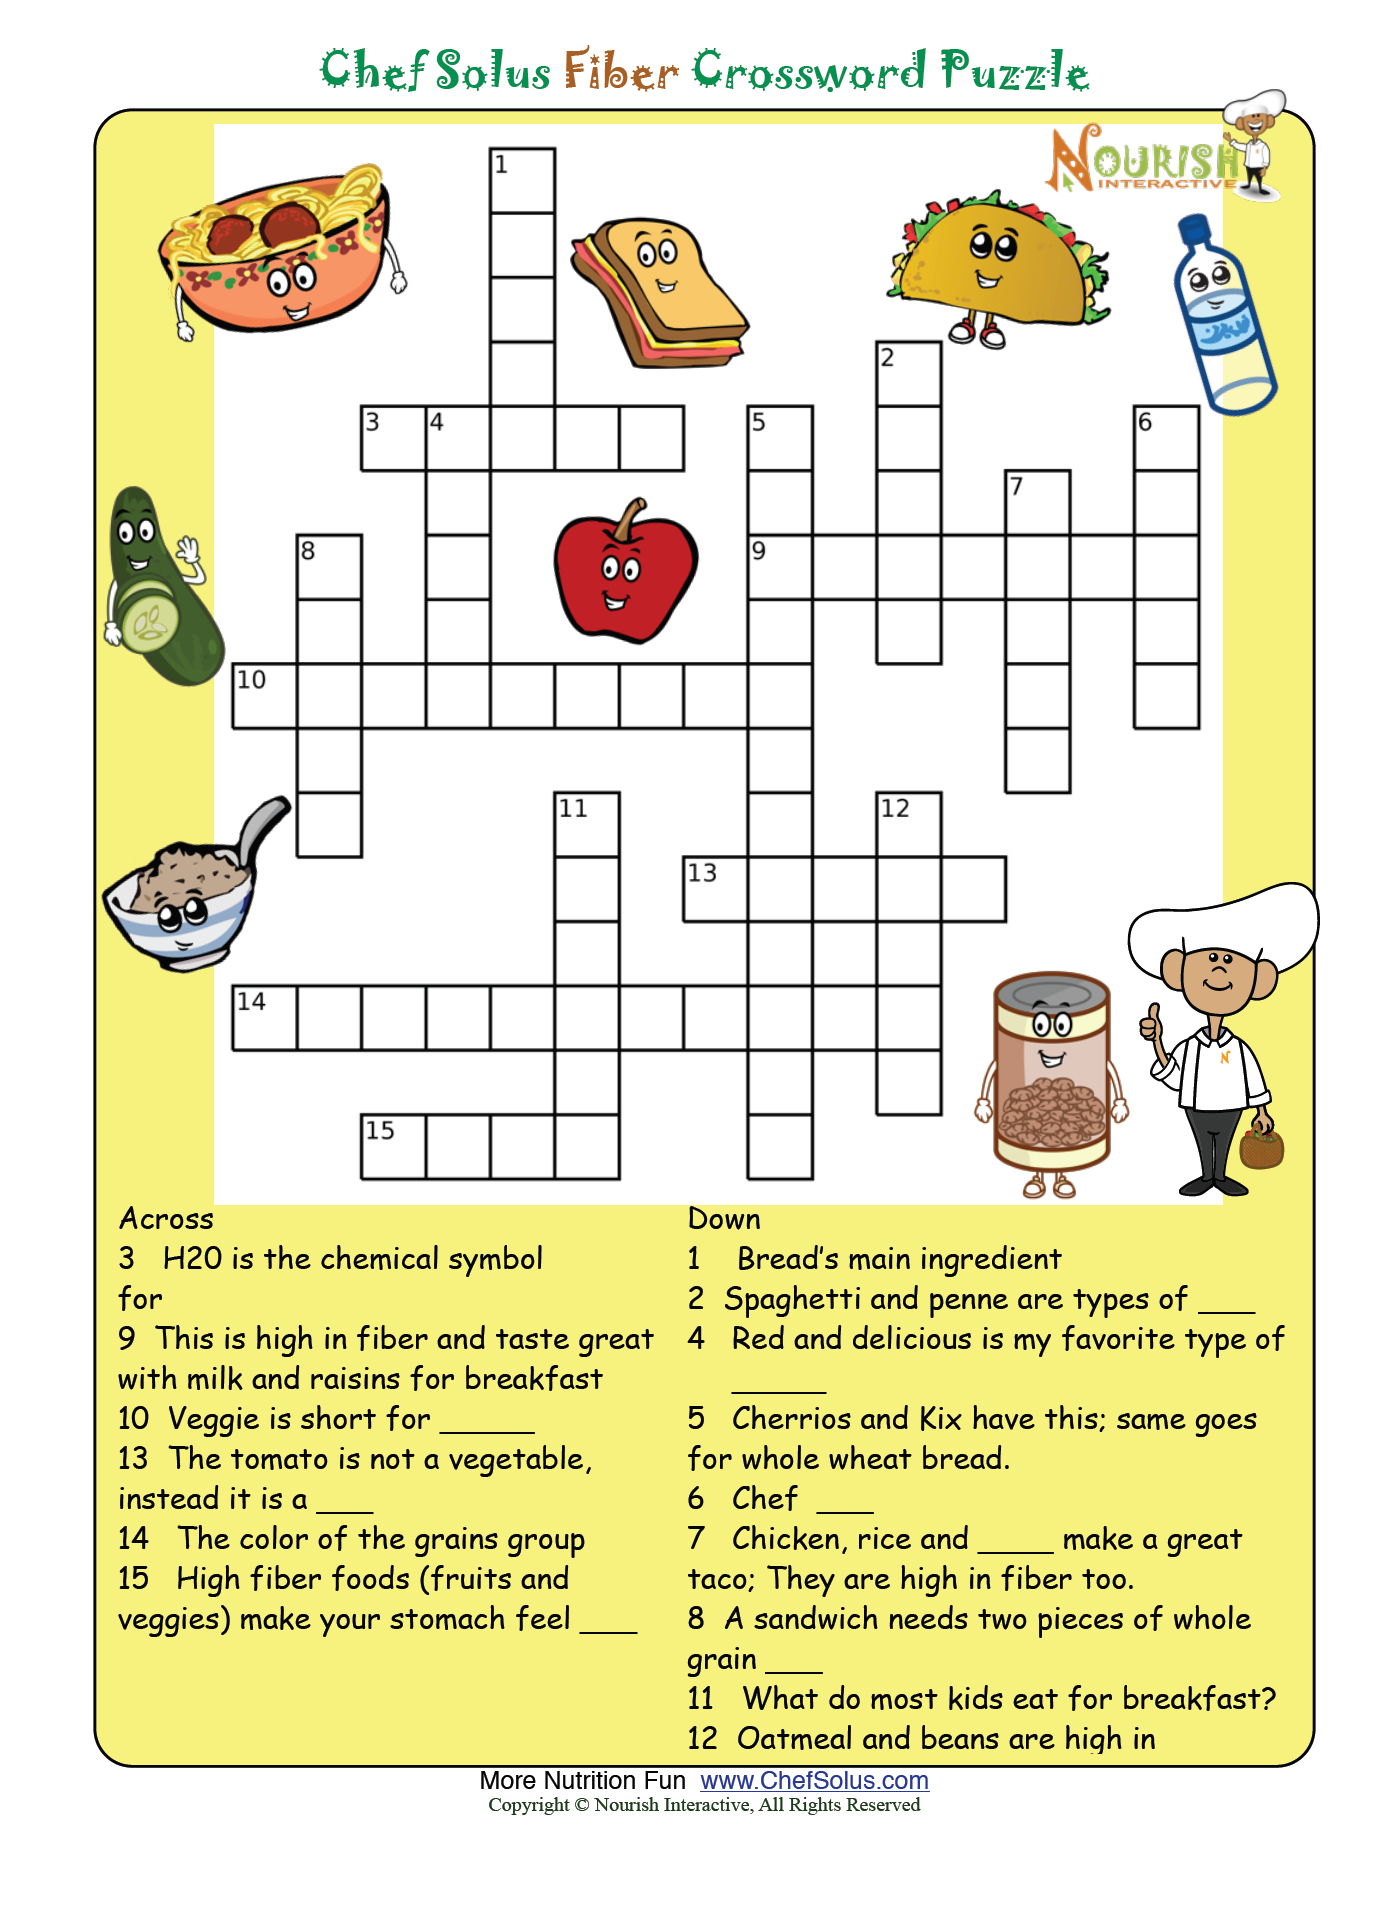 Fiber Puzzle * Please Make Sure To Print The Answer Key As Well - Nutrition Printable Puzzle